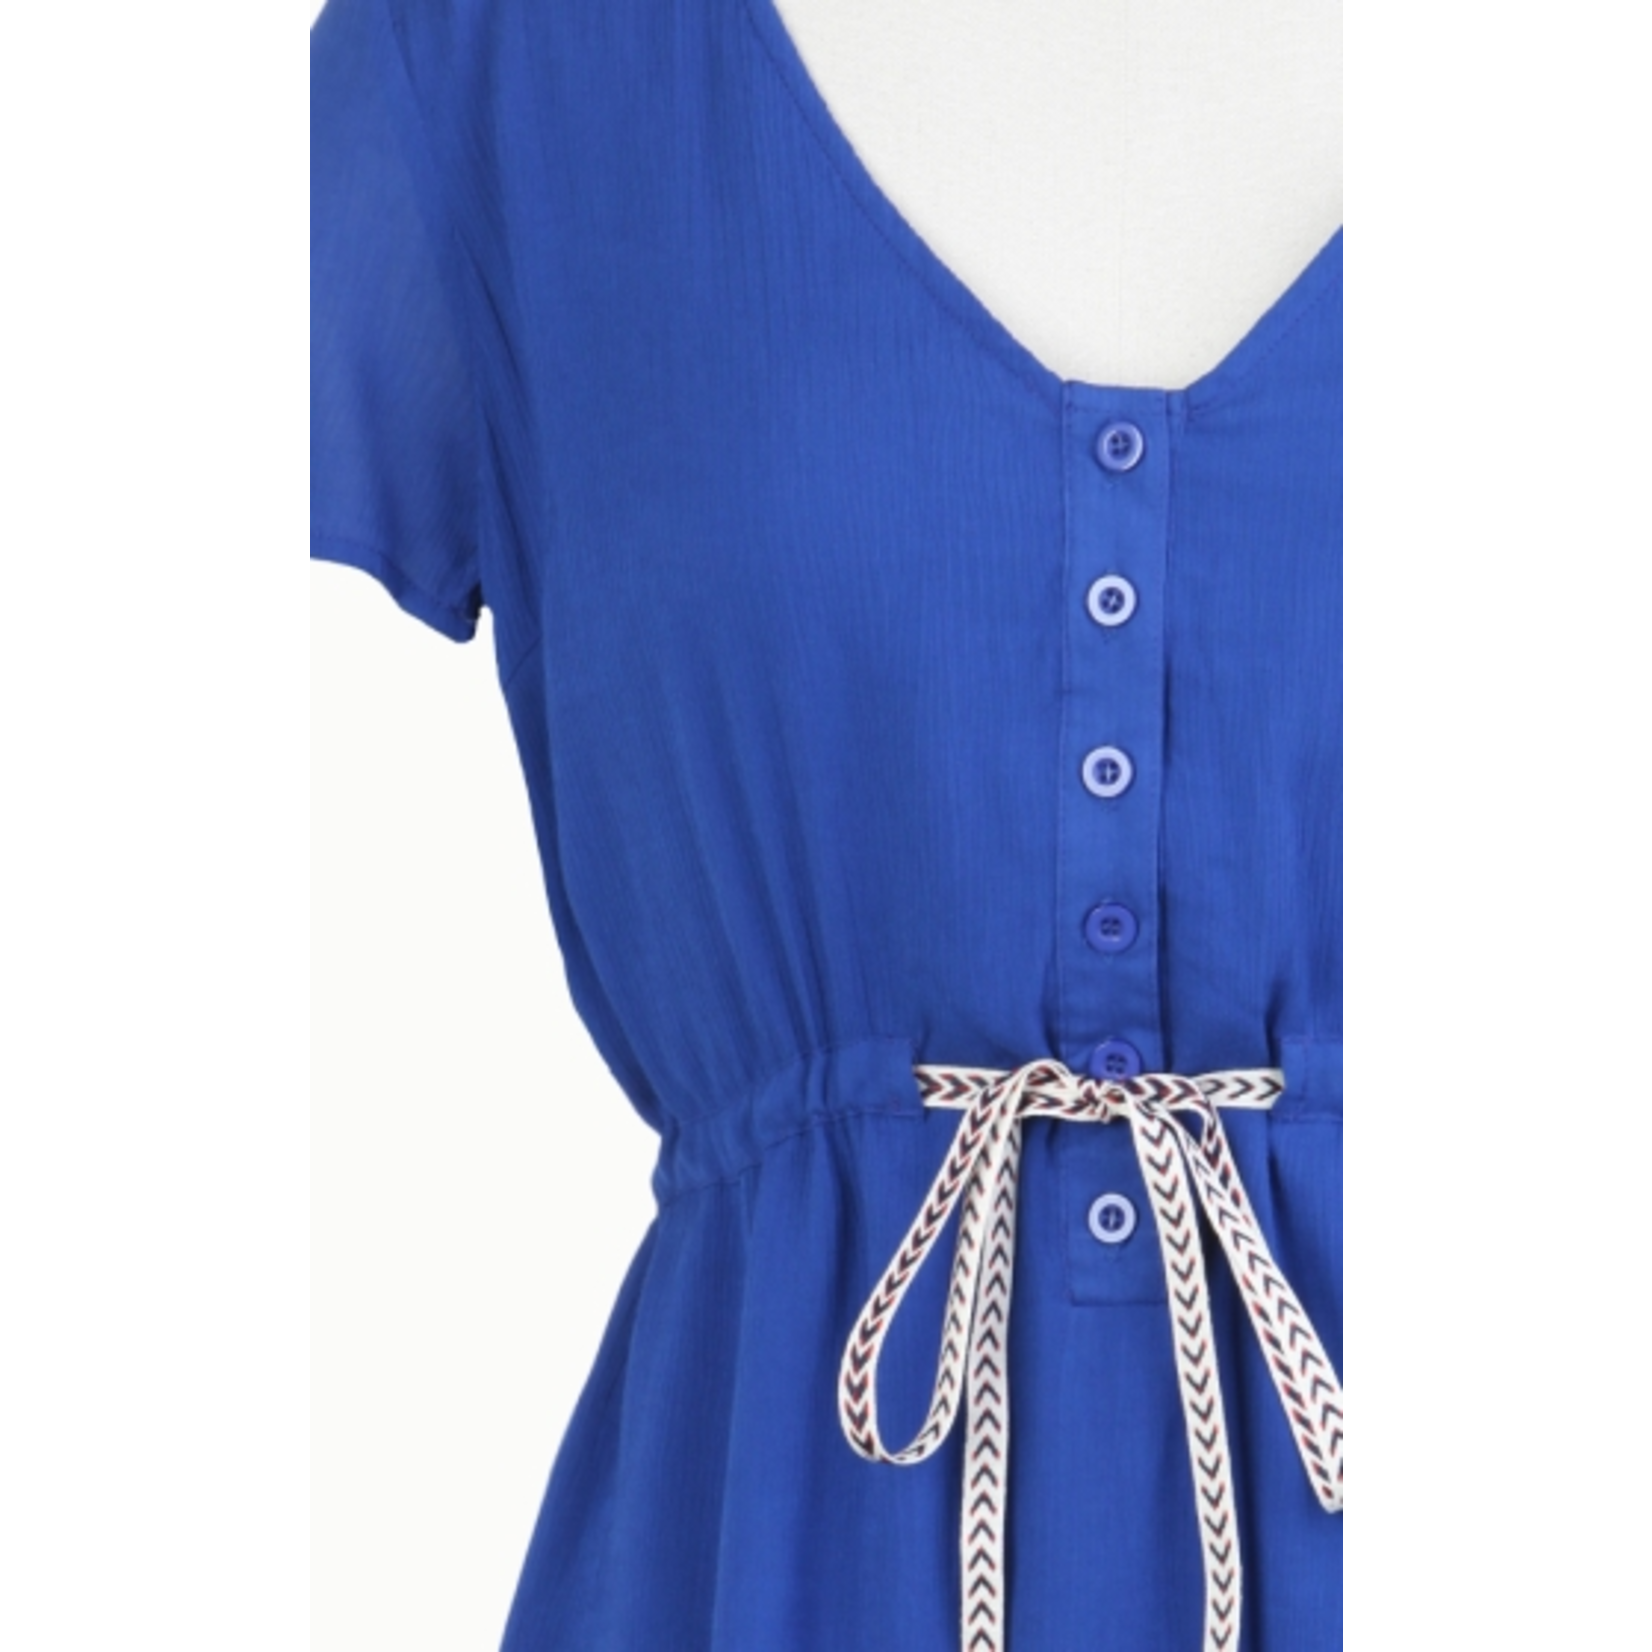 Tulle Tulle Button Up Dress with Contrast Drawstring, sale item, Was $73